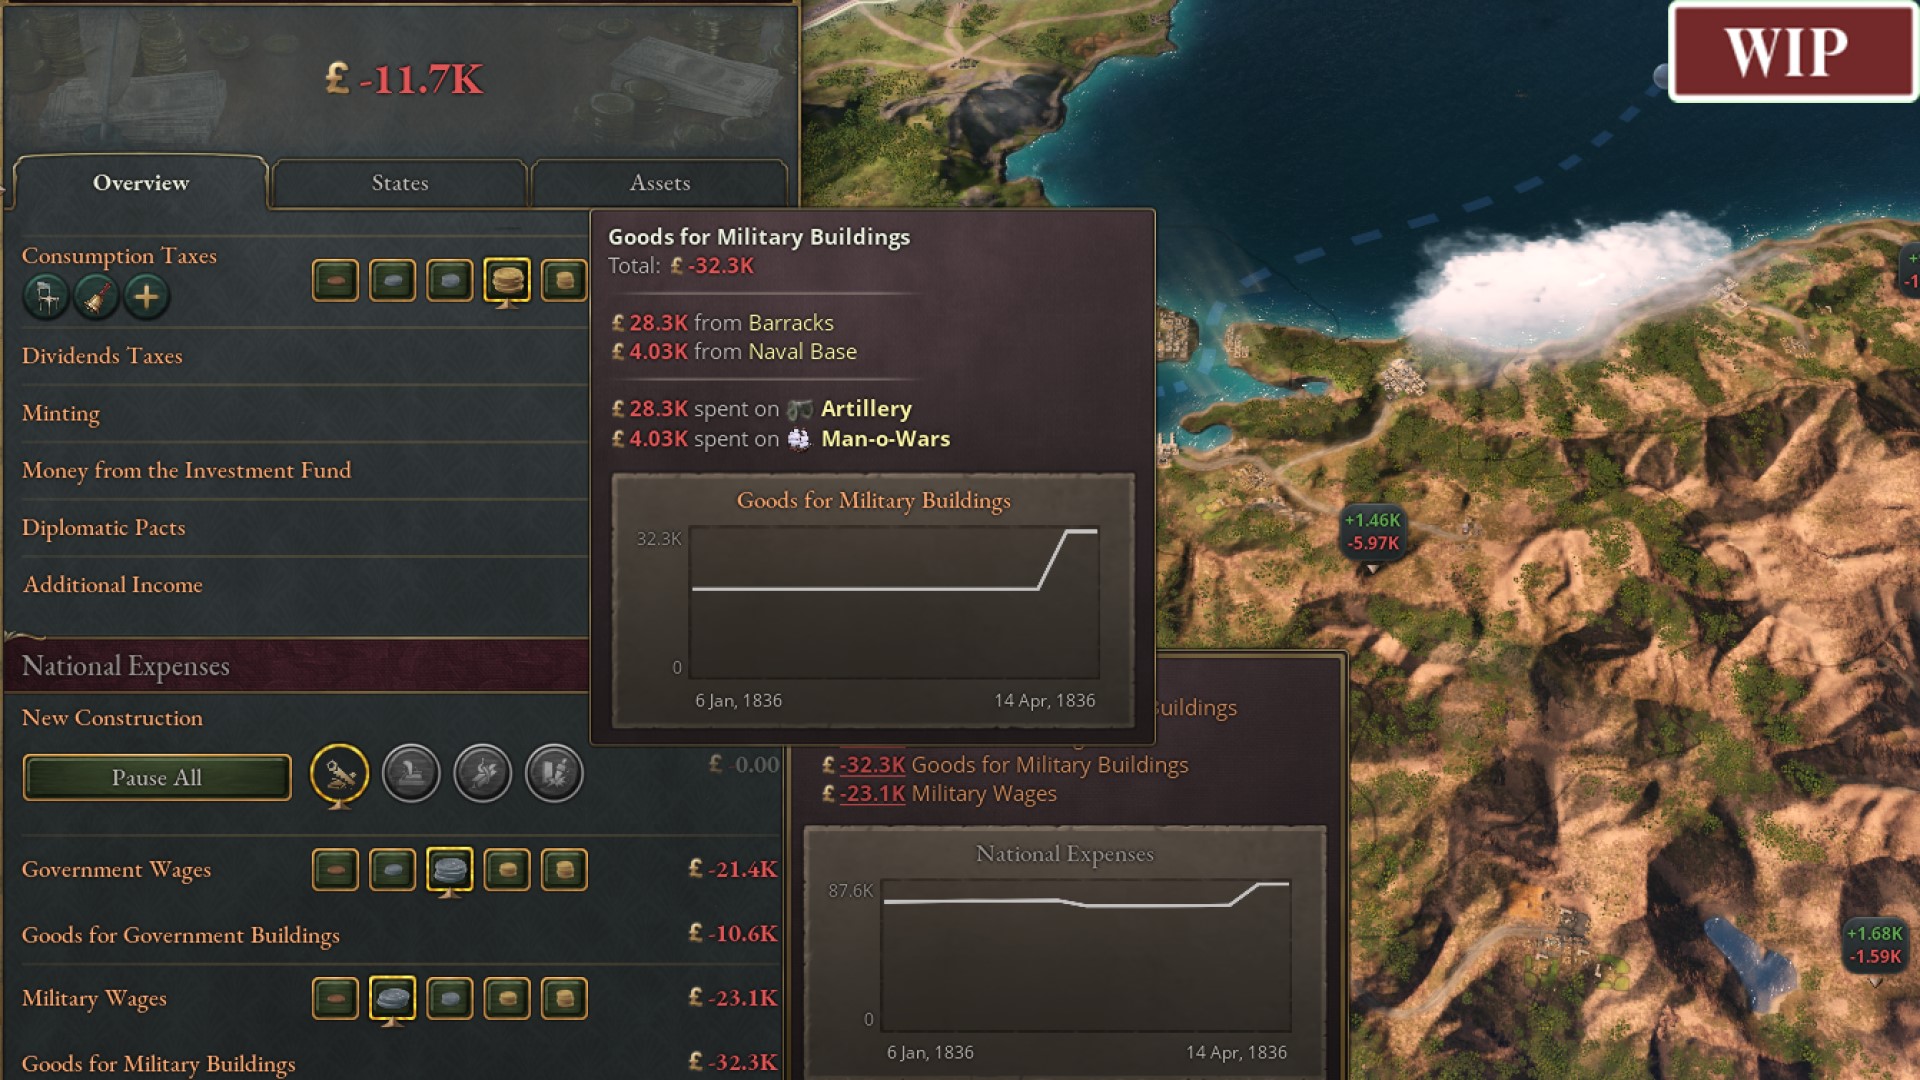 Victoria 3 will reflect the astronomical costs of war